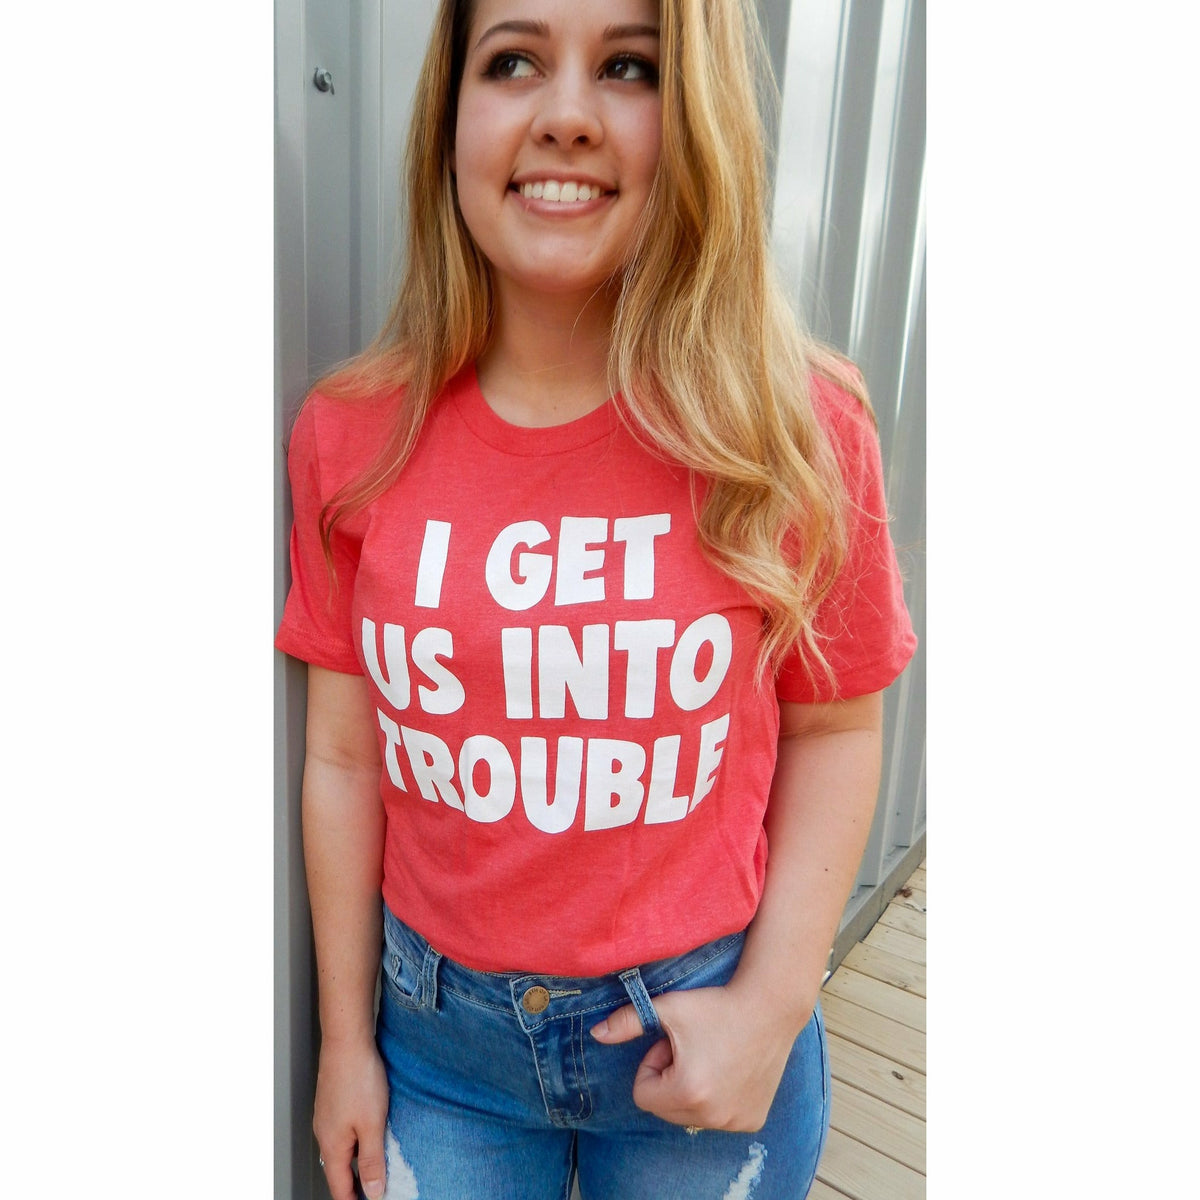 I get us OUT of trouble tee/tank